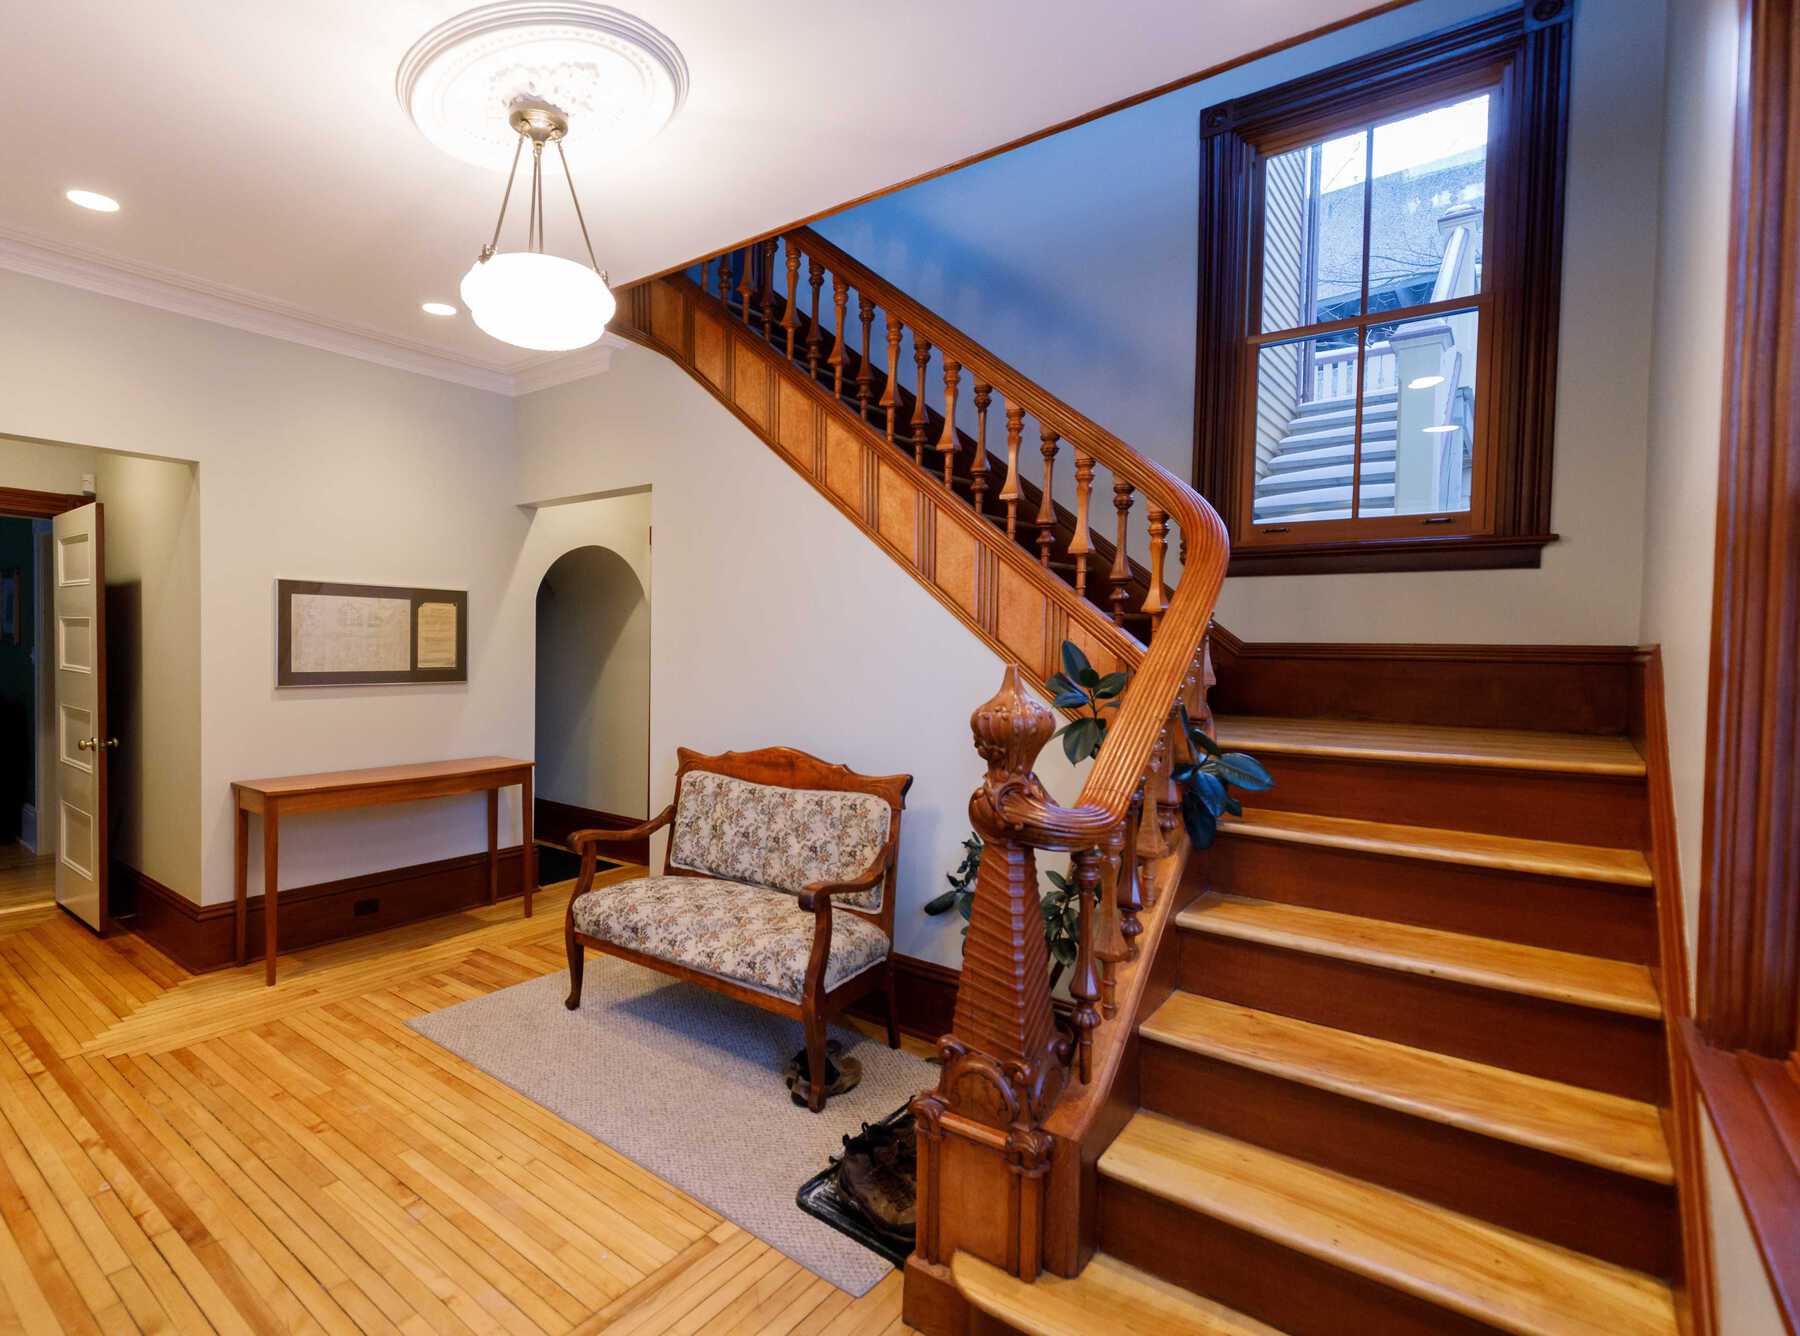 Interior entrance area of office with ornate wooden railing